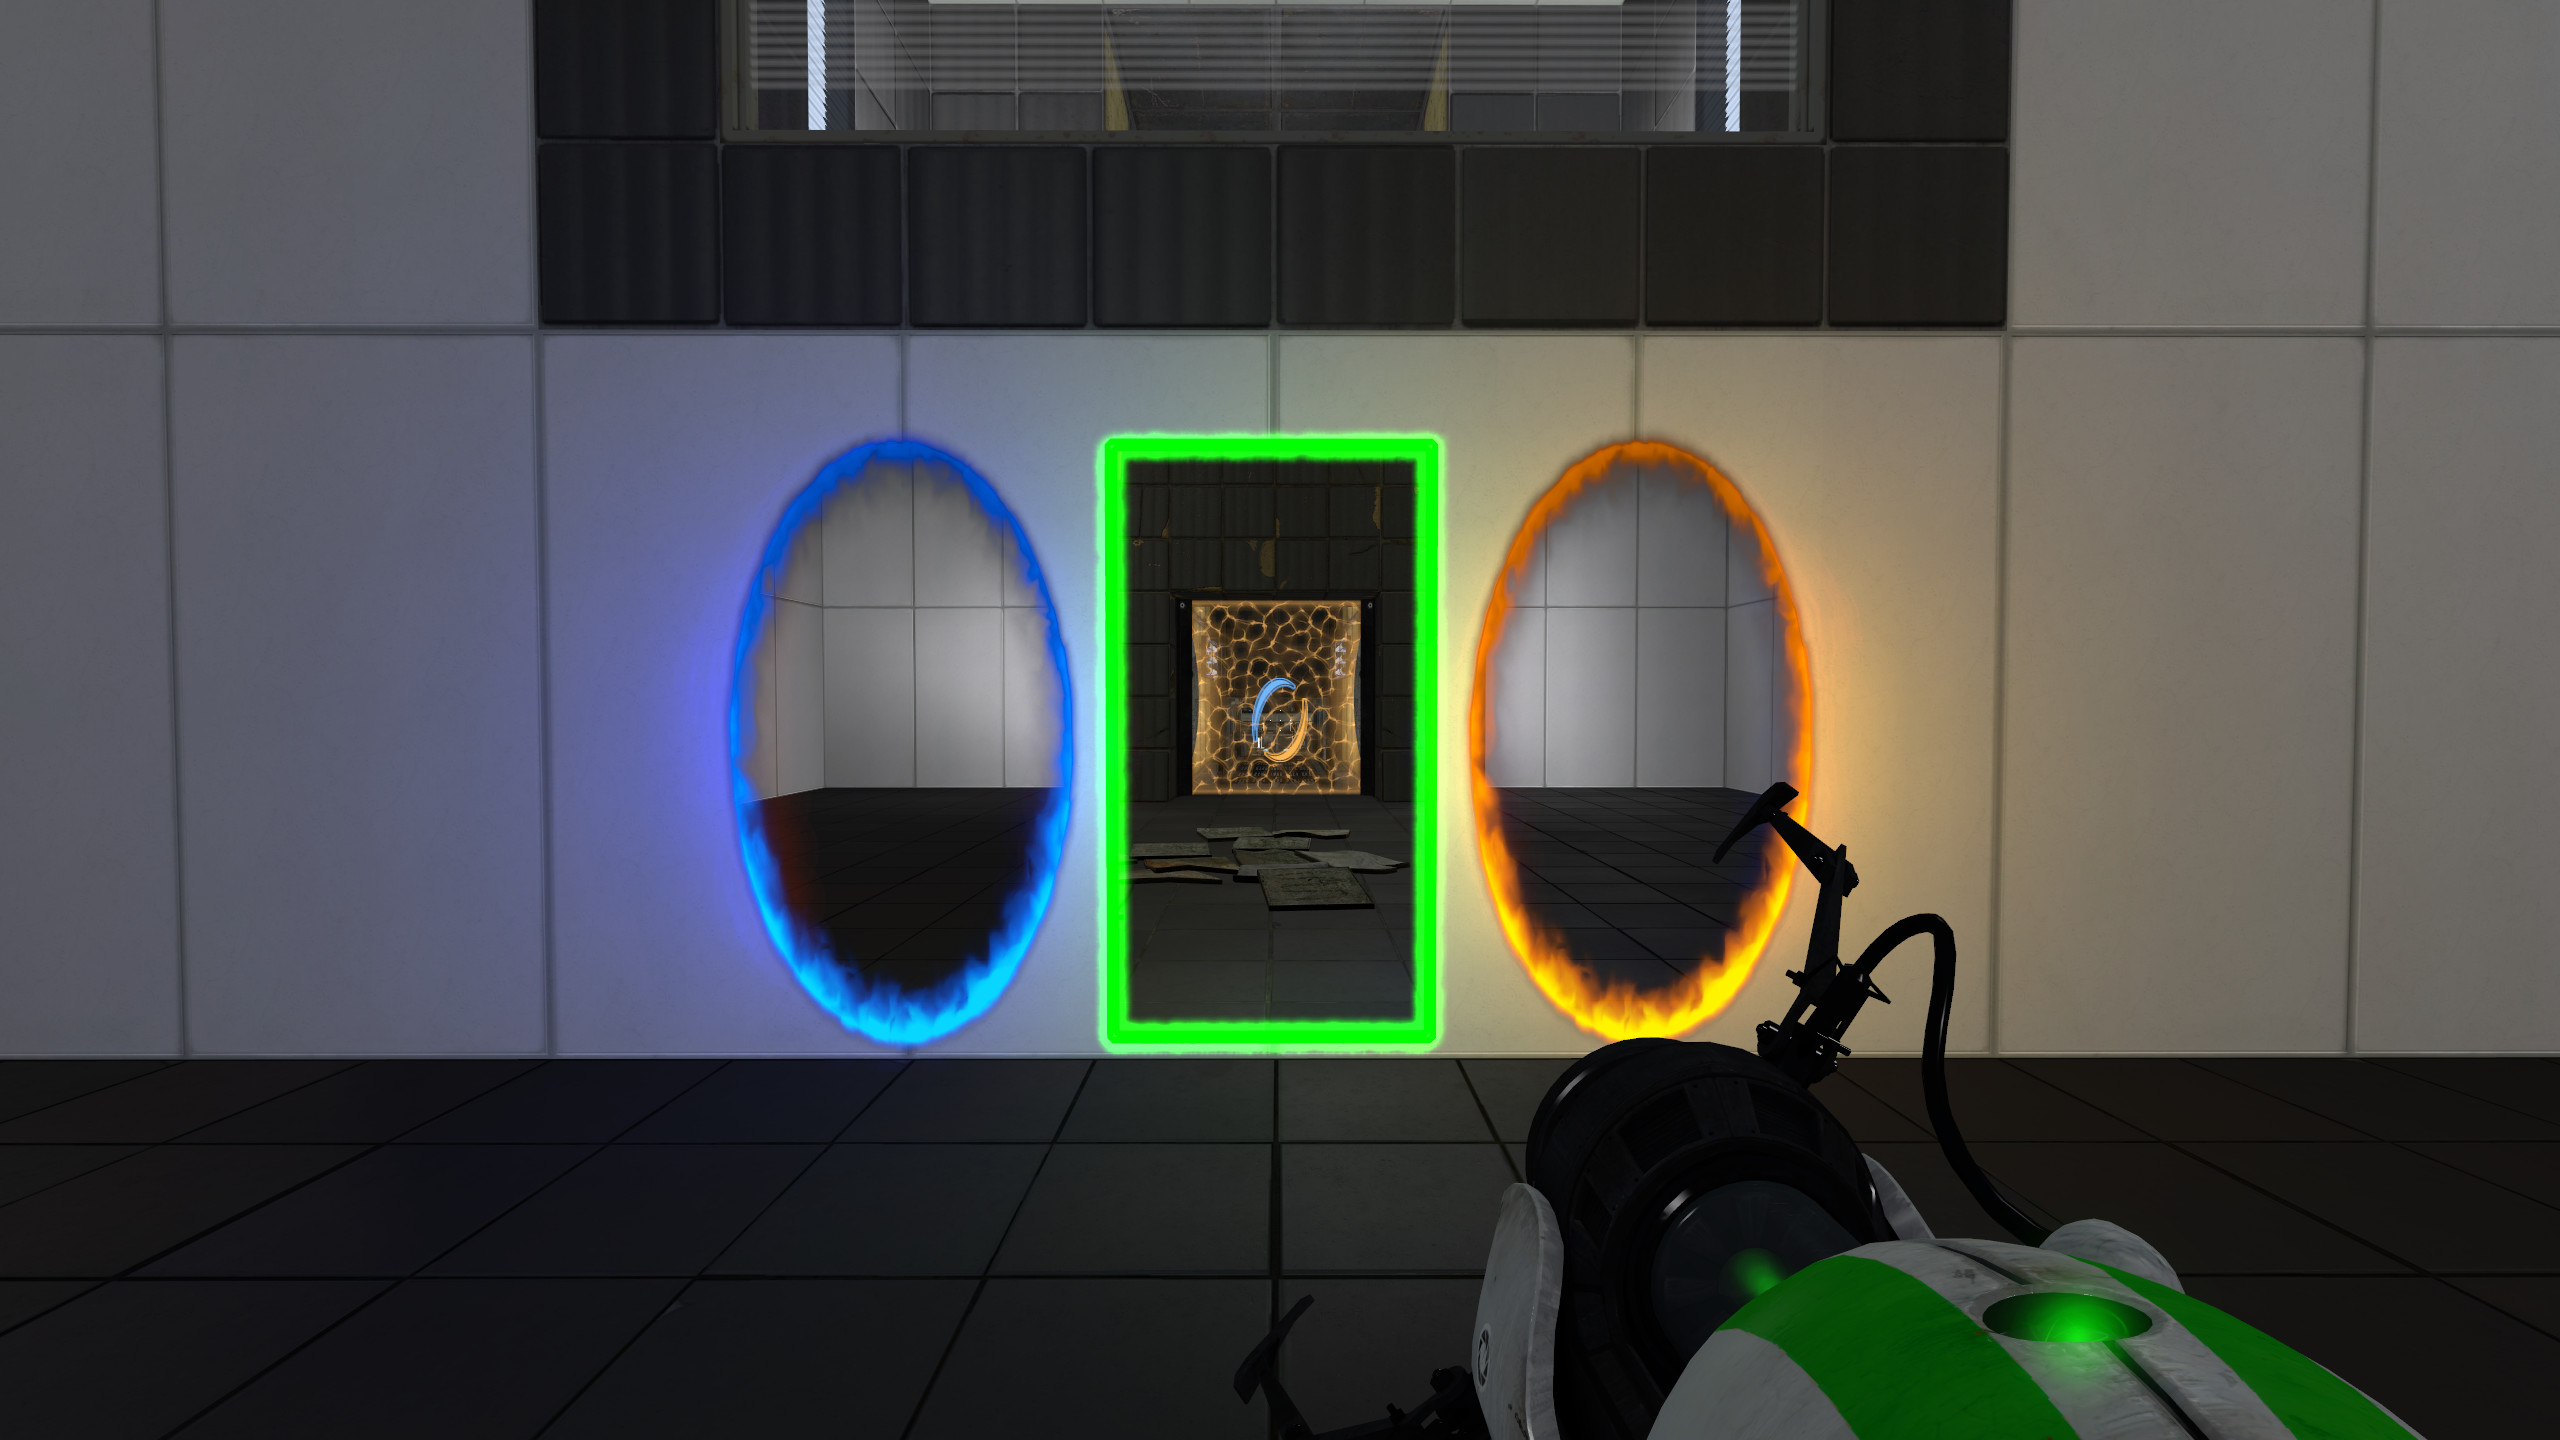  Portal Reloaded mod adds a third portal that lets you travel through time 